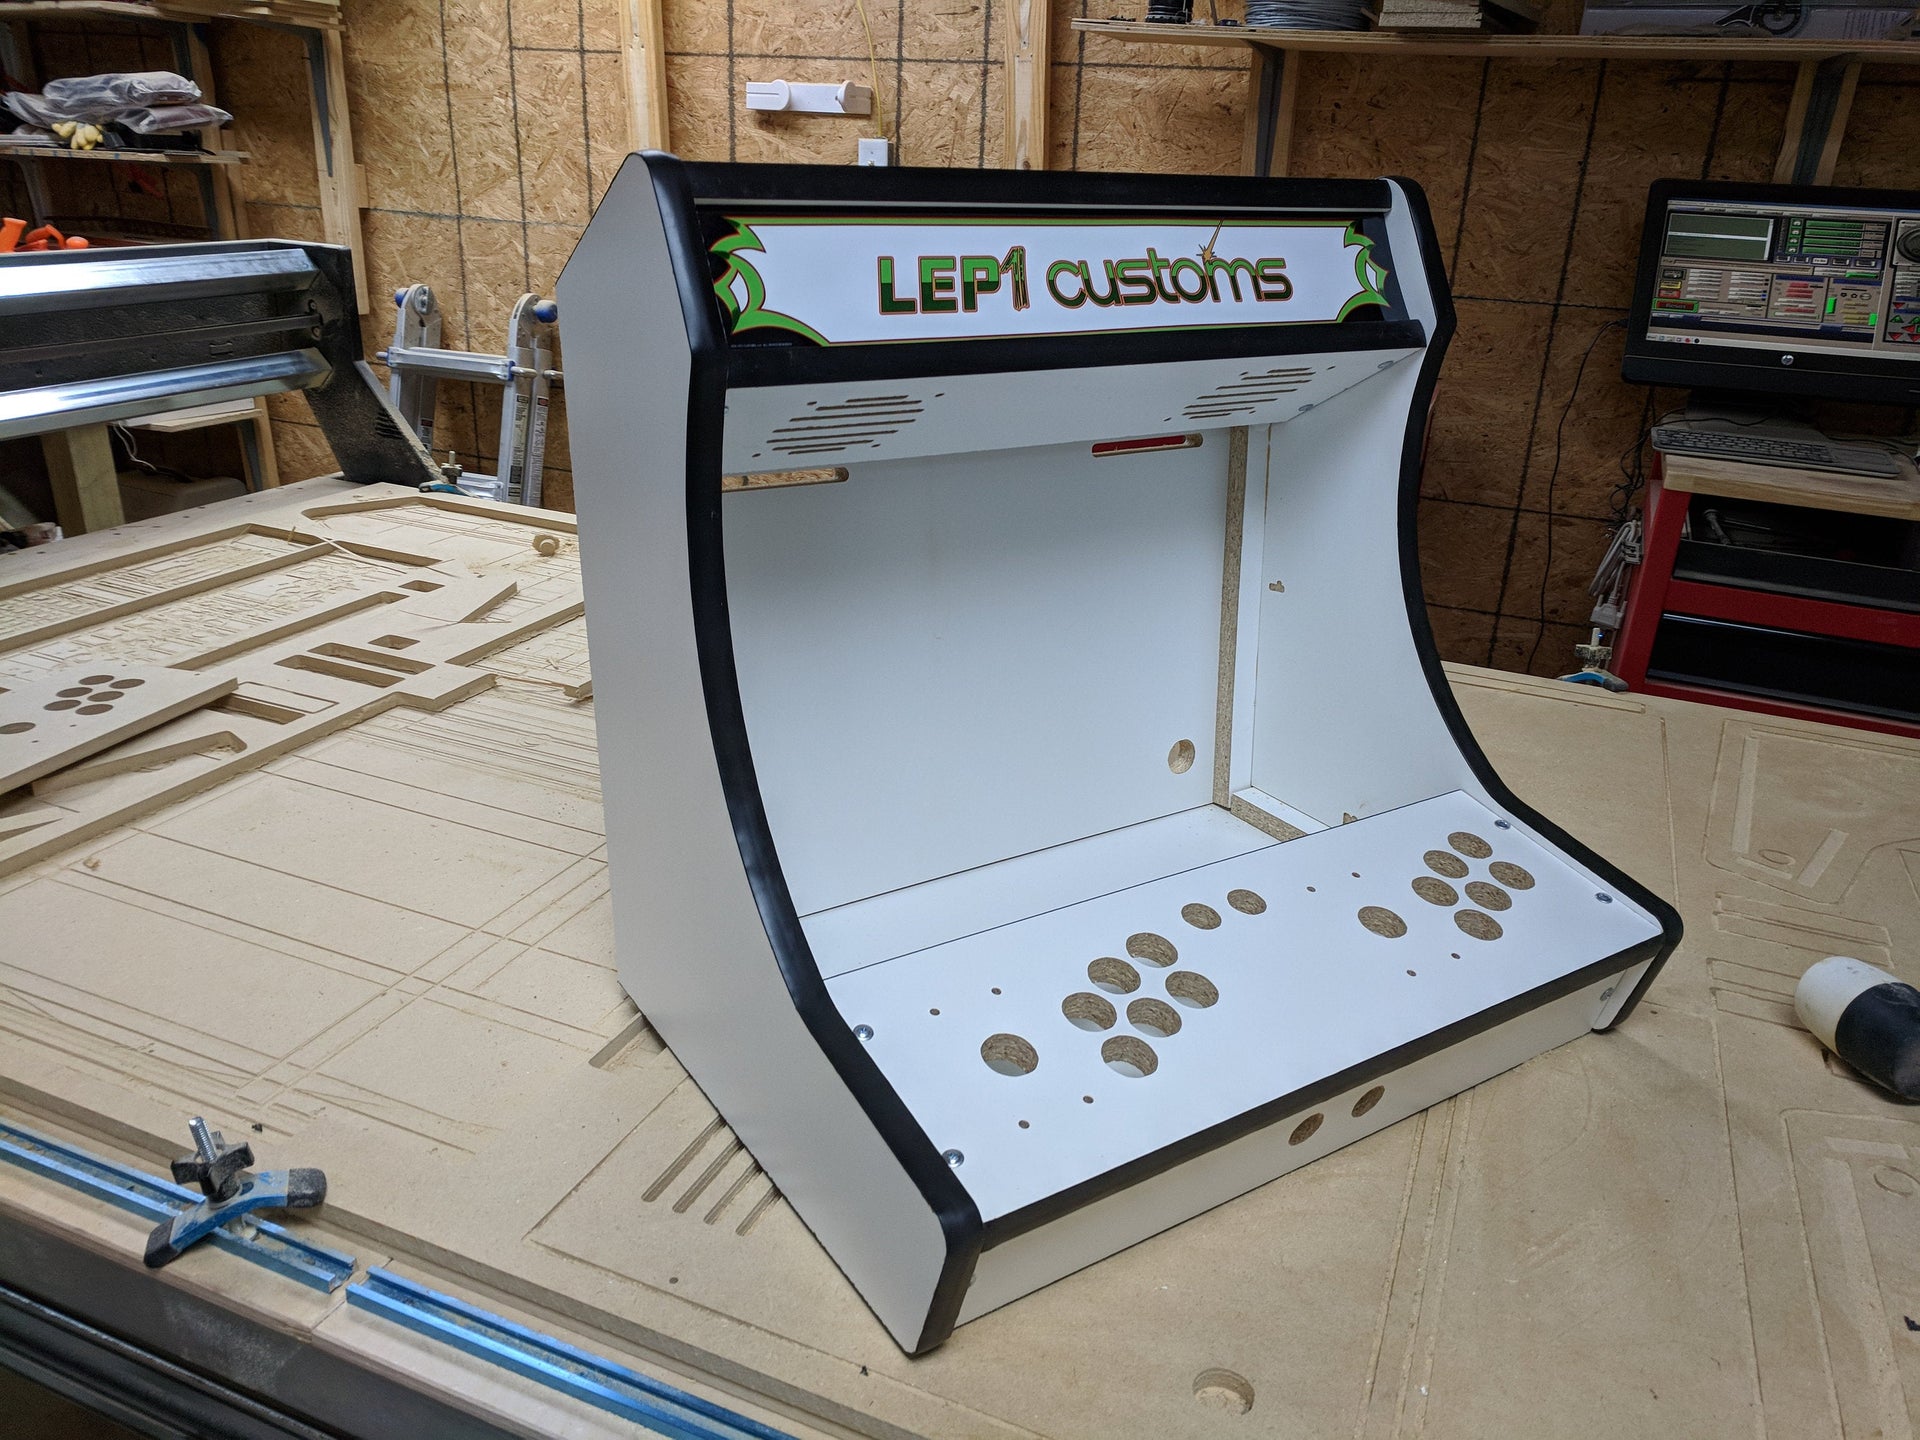 Lvl23w 2 Player Slotted 3 4 Melamine Bartop Arcade Cabinet Kit For 19 Lep1 Customs